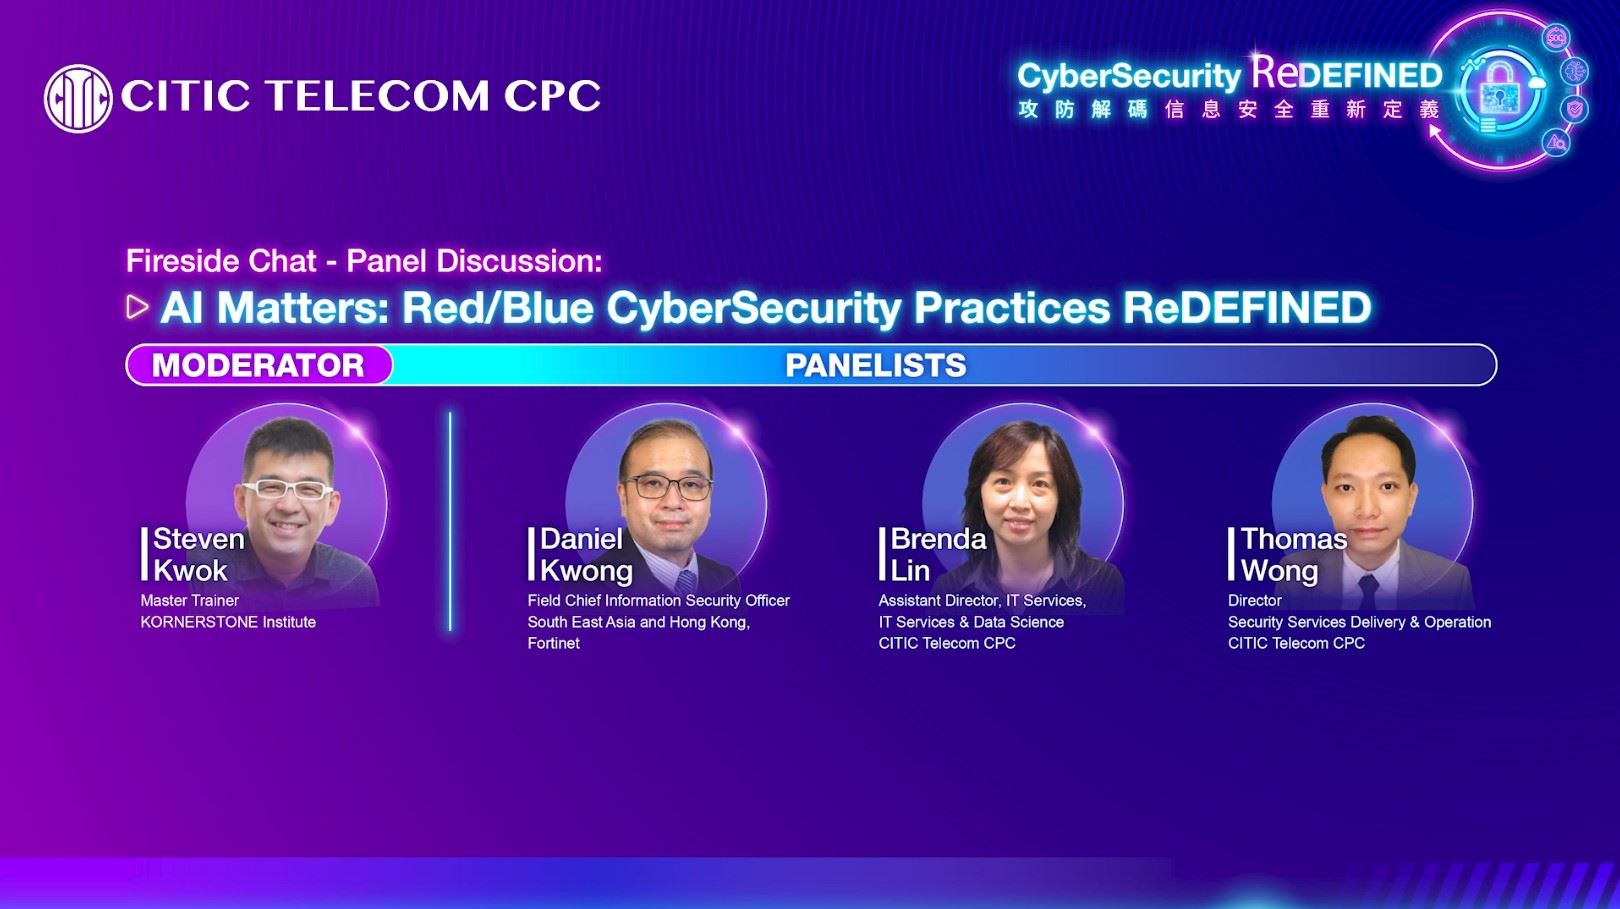 【CyberSecurity ReDEFINED Conference | Event Highlights】 Fireside Chat: Panel 1 Discussion